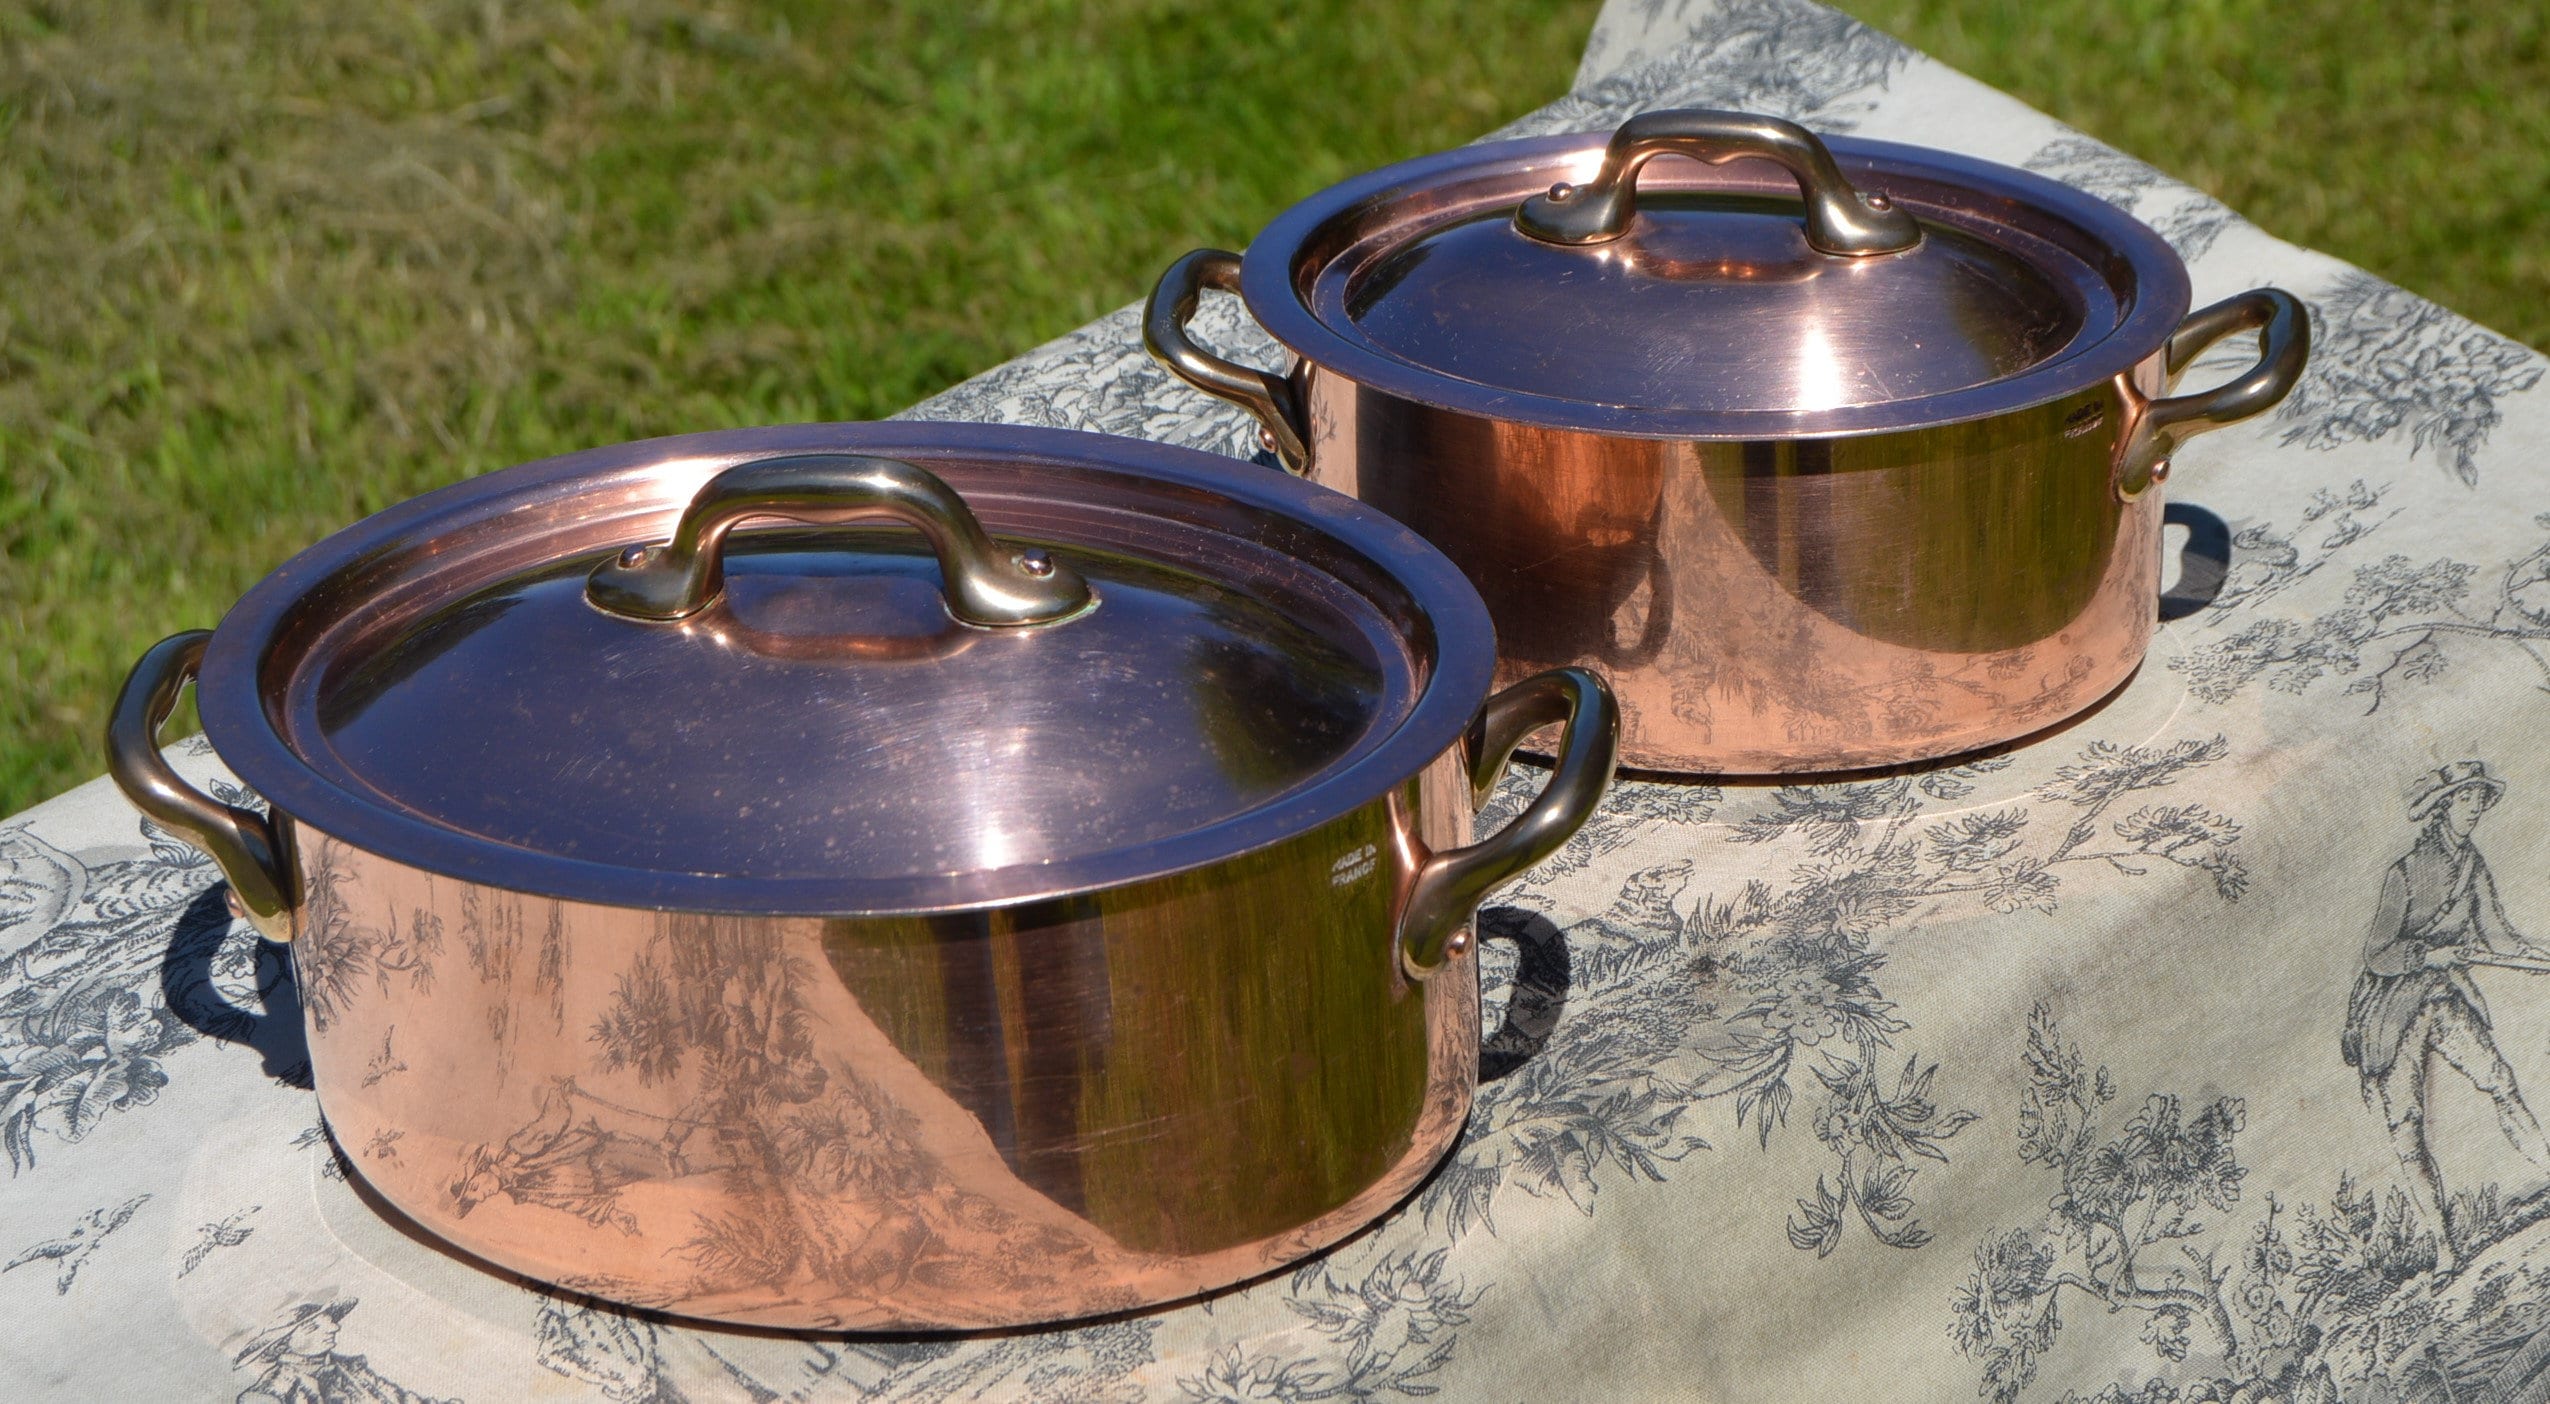 Made in France” – Vintage French Copper